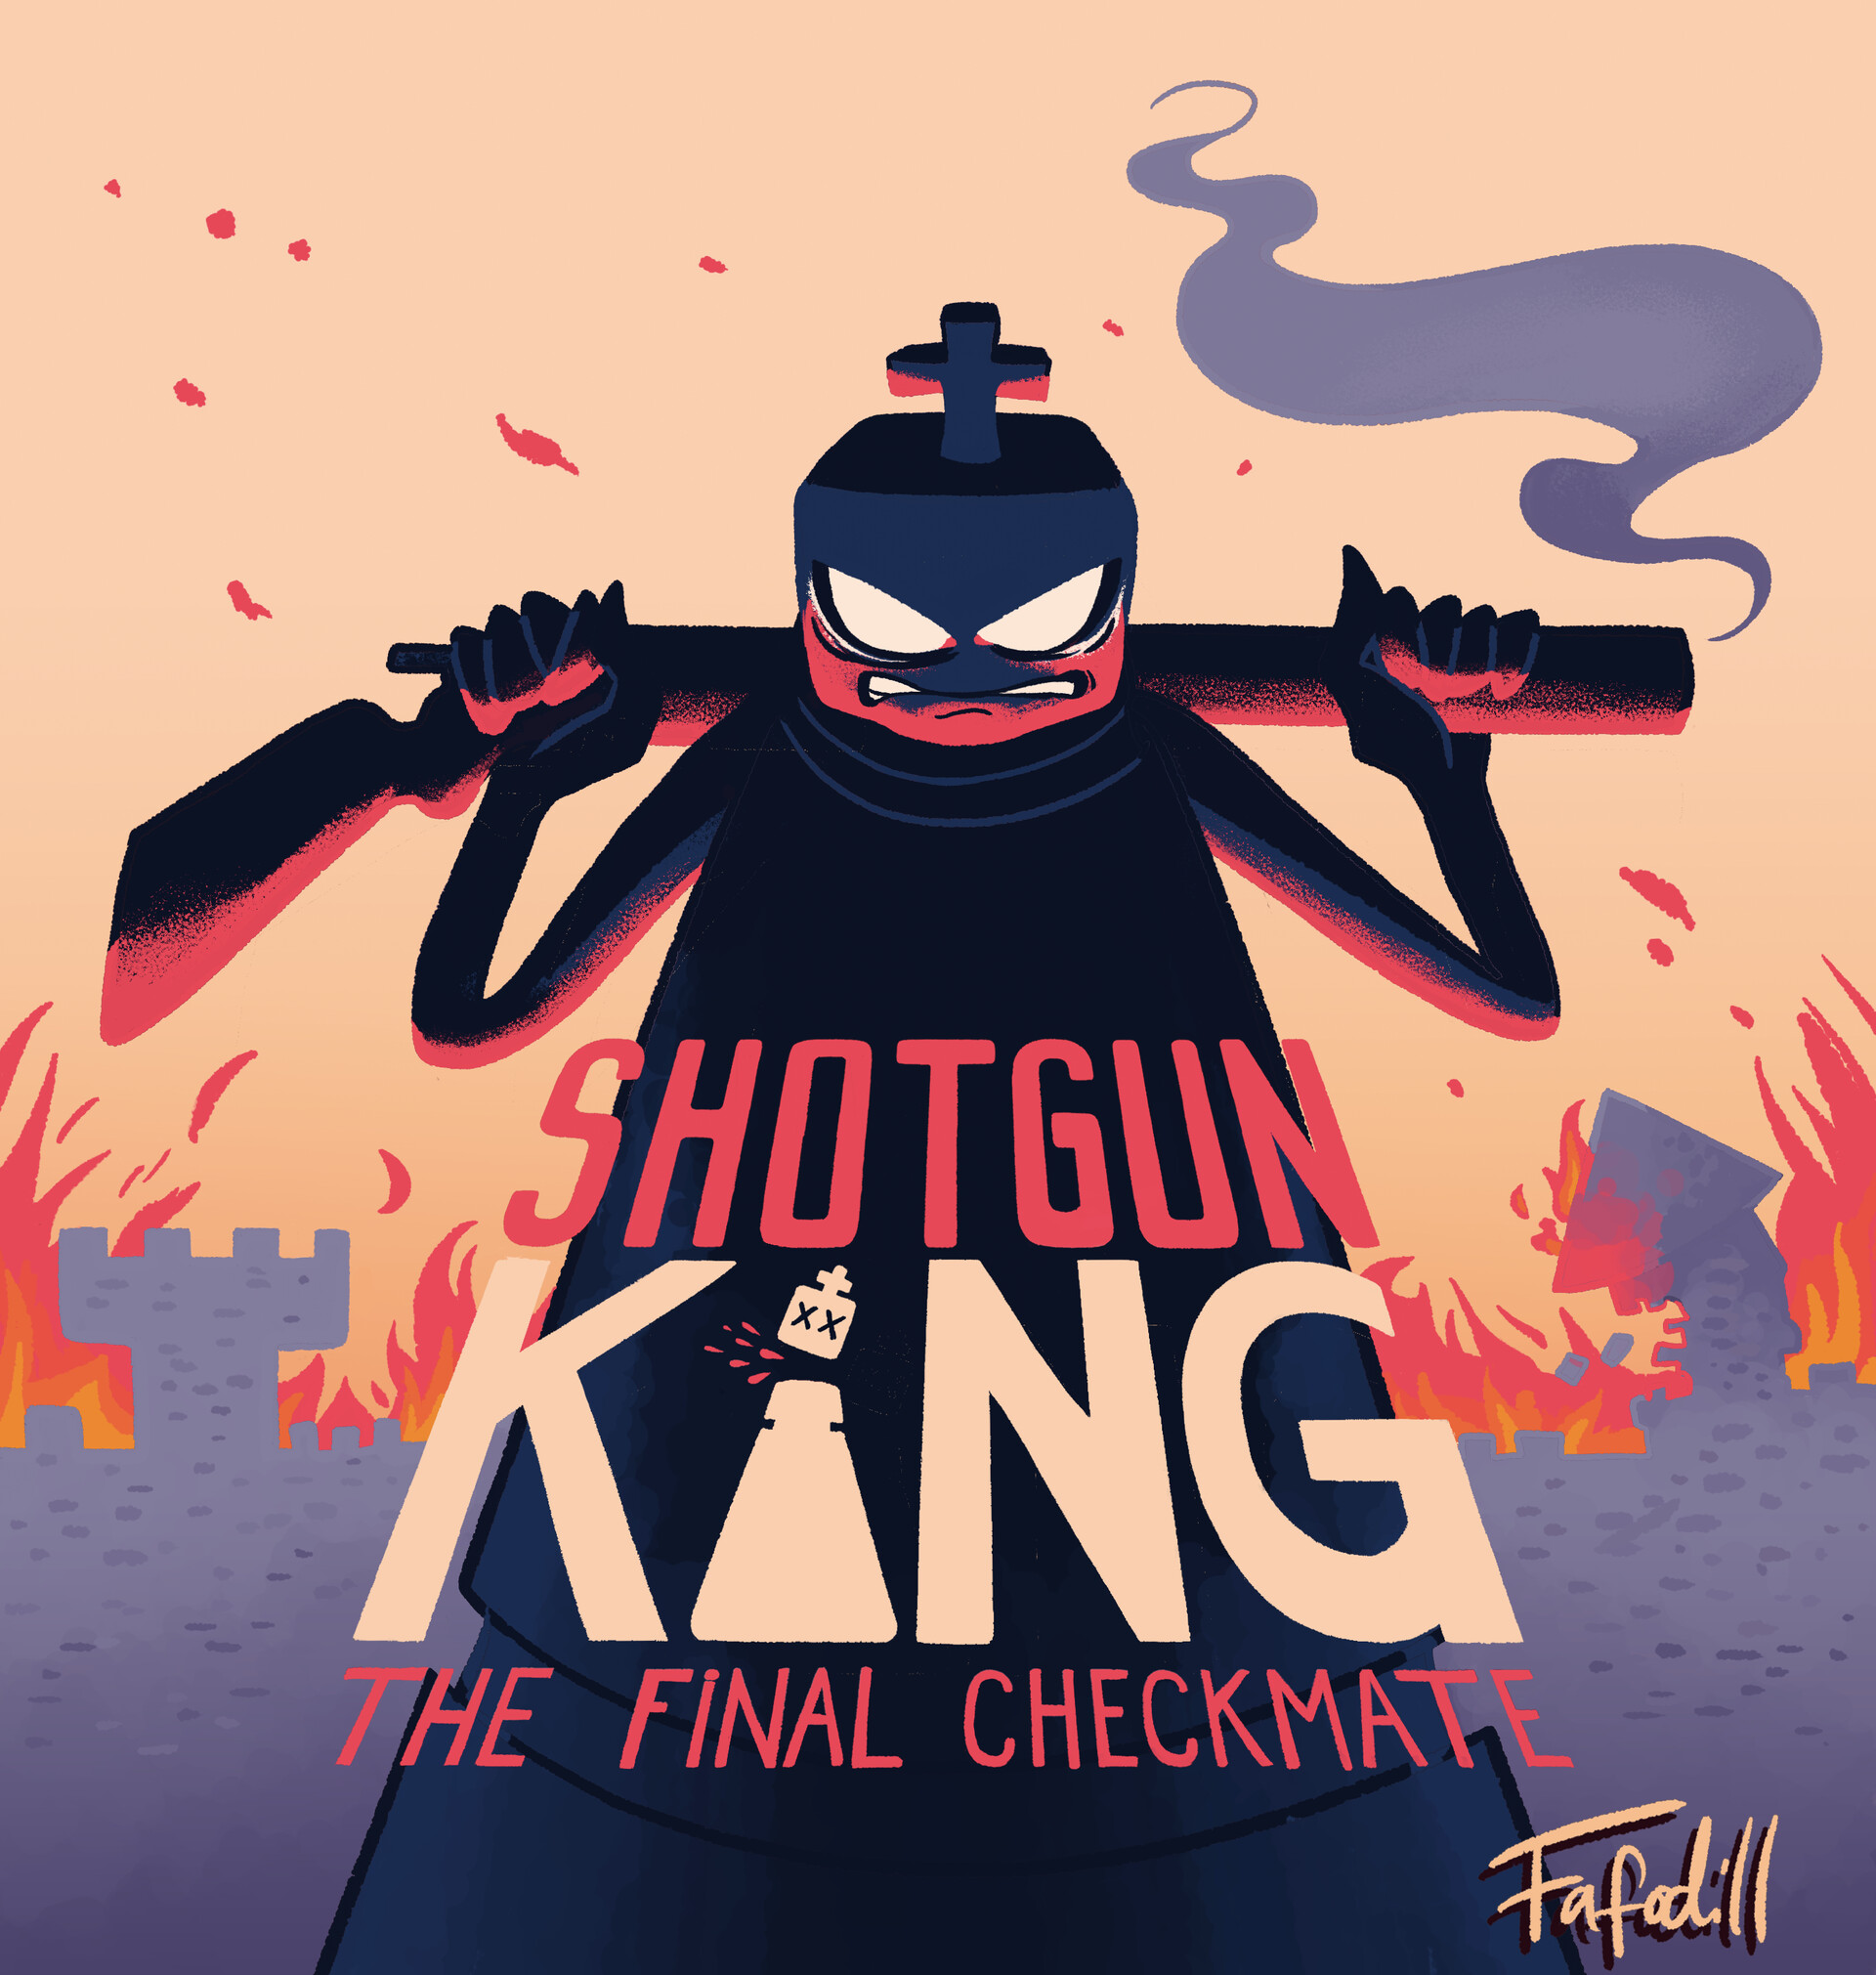 How long is Shotgun King: The Final Checkmate?